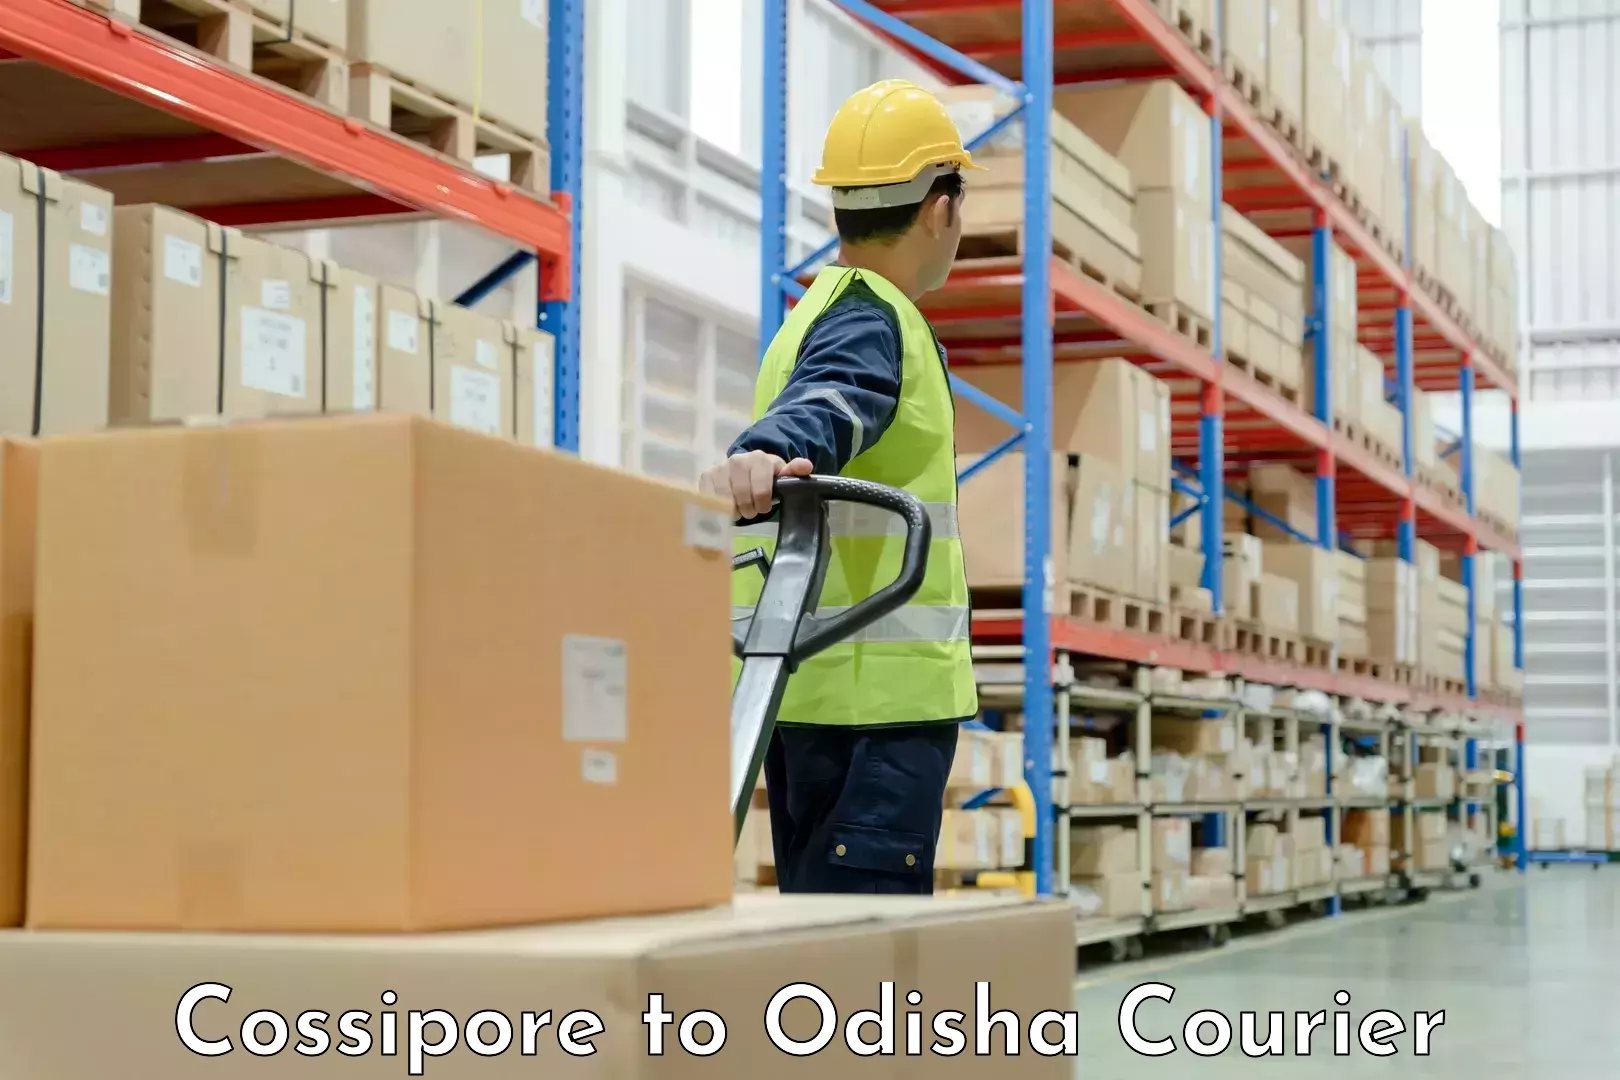 Household shifting services in Cossipore to Polasara